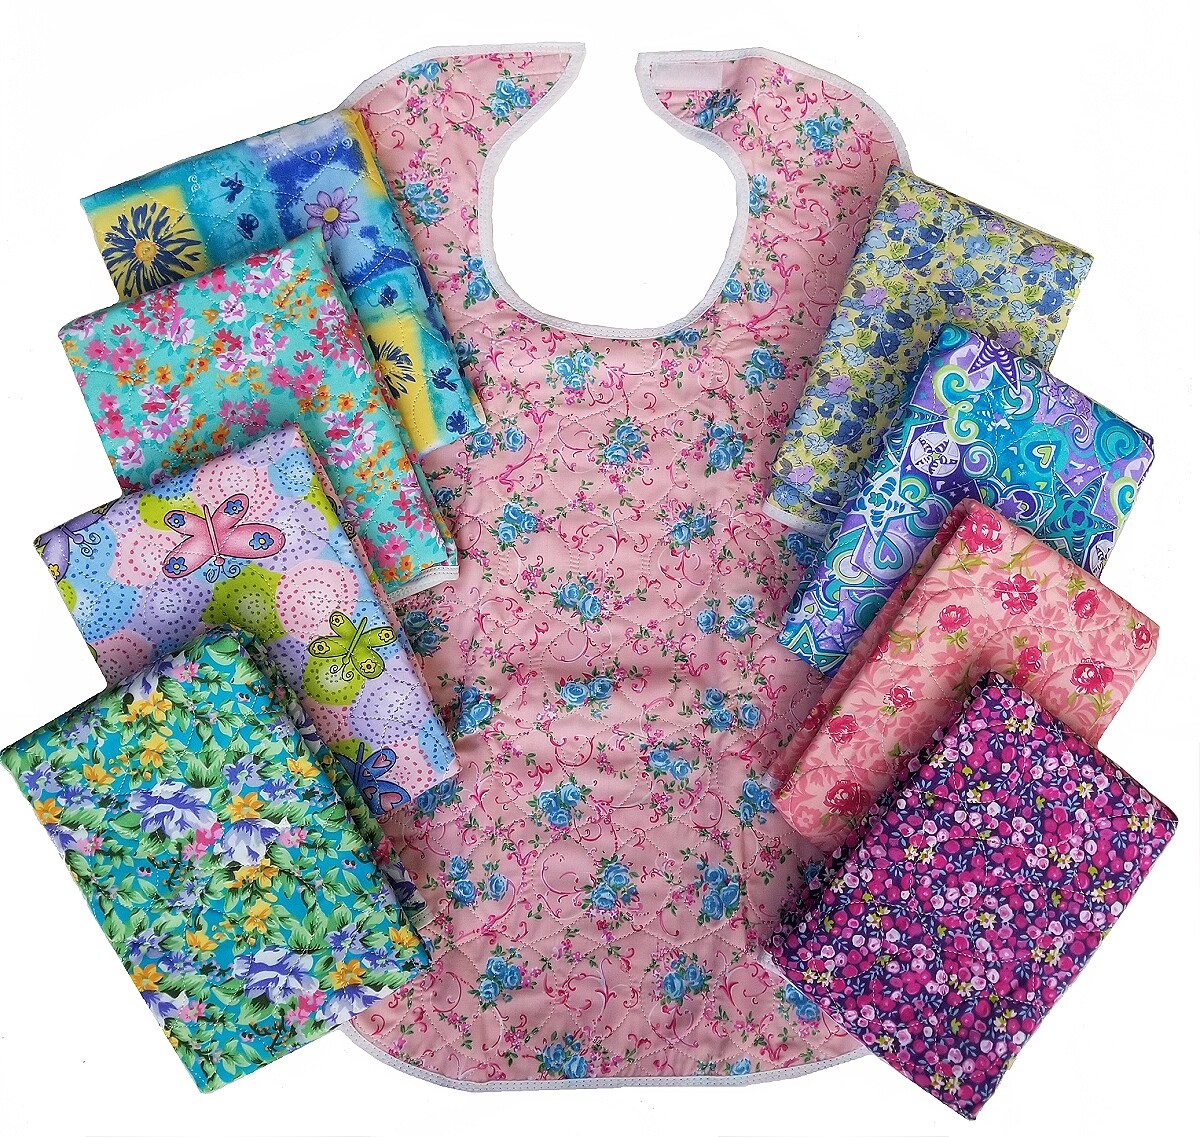 floral adult bibs and clothing protectors